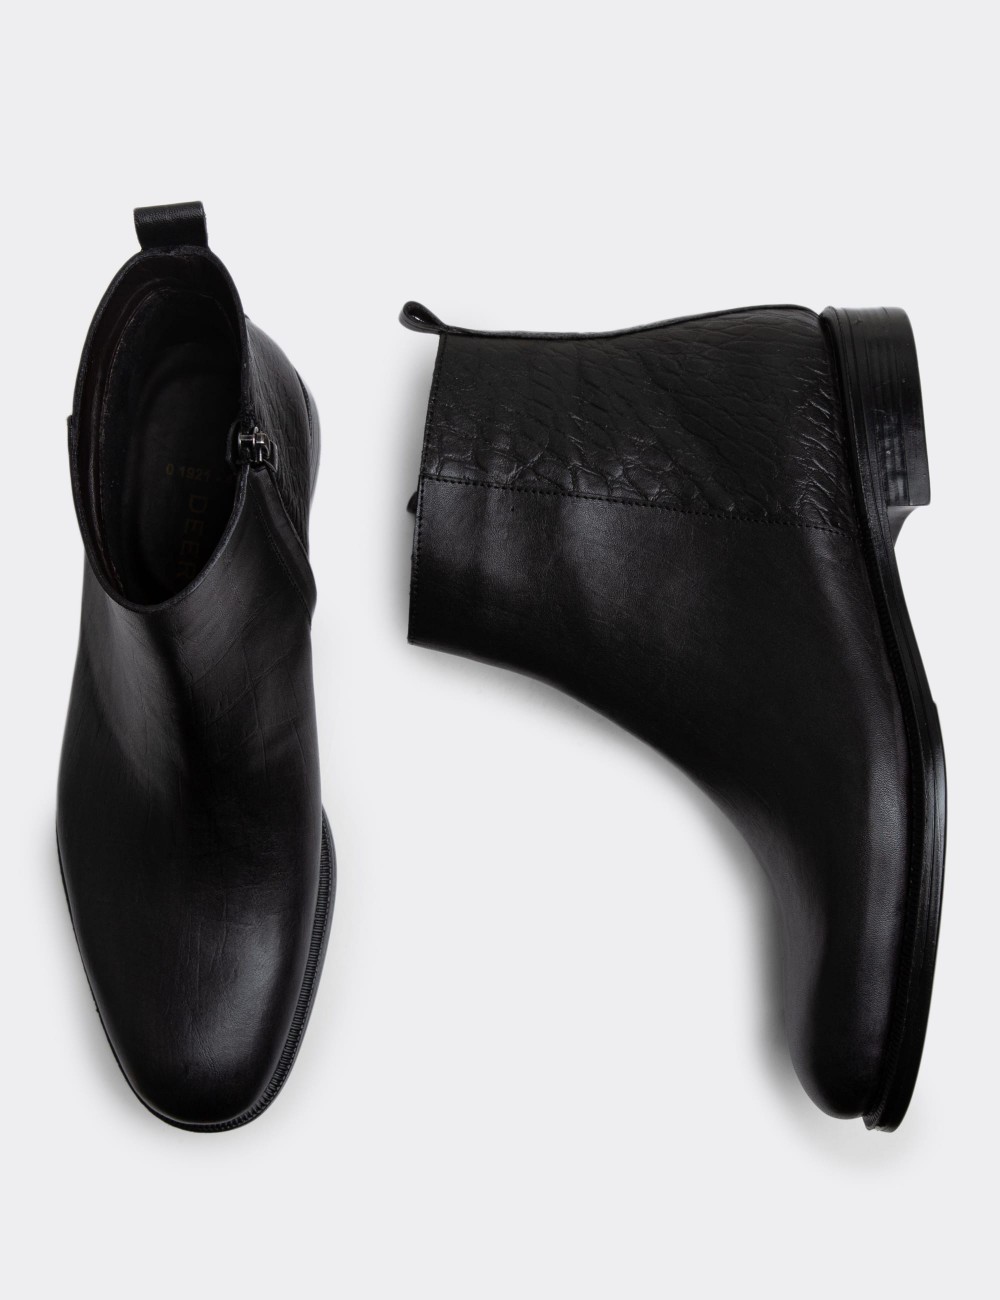 Black Leather Boots - 01921MSYHC03